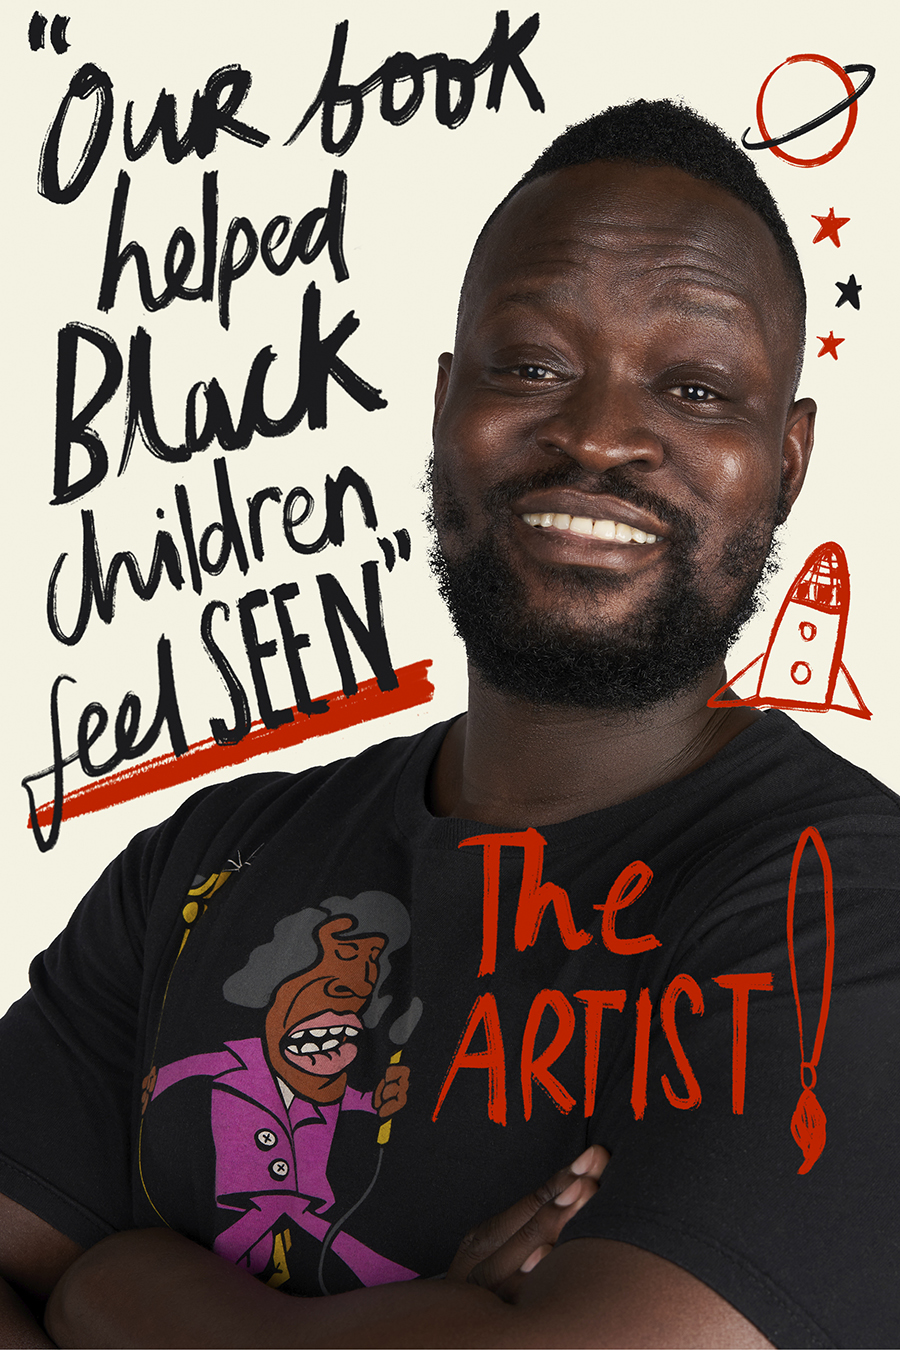 A photograph head-and-shoulders portrait of Dapo Adeola with 'Our book helped Black children feel seen' written around